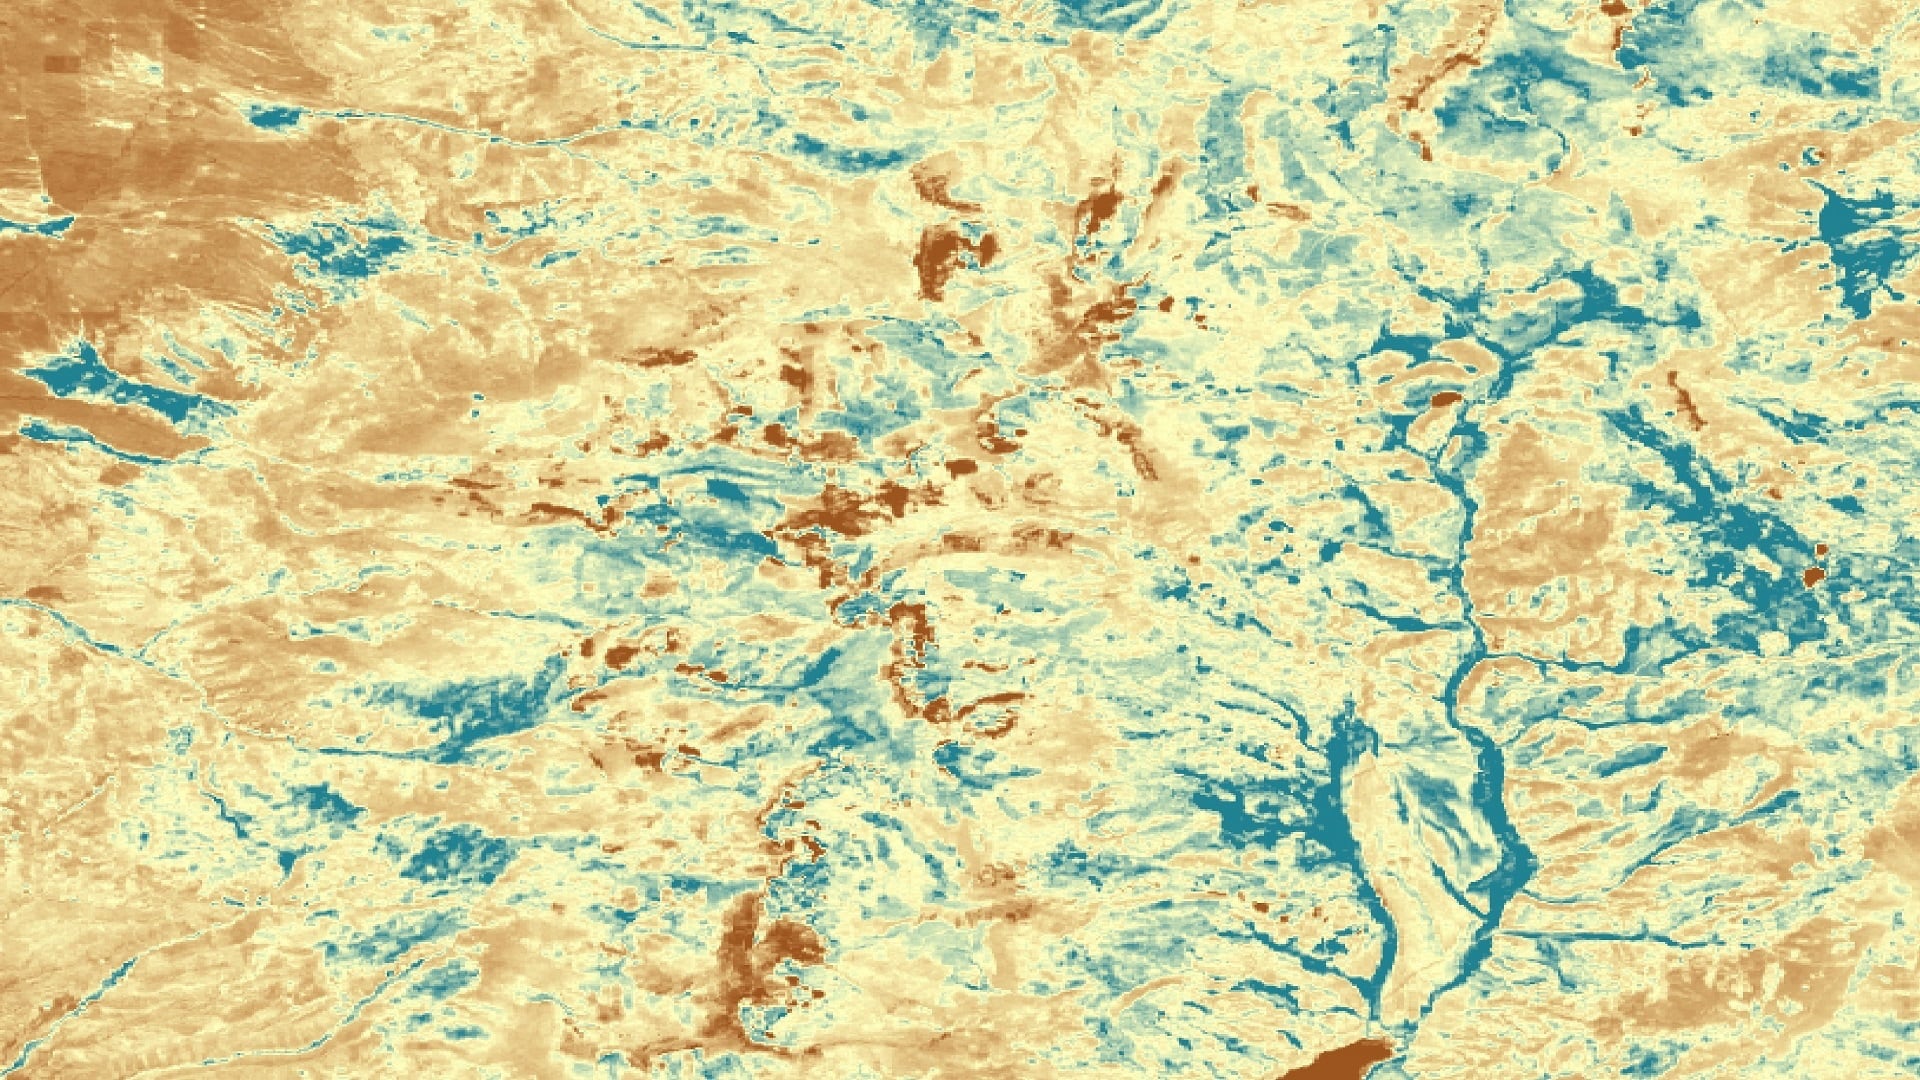 Tasseled-cap processed Landsat 8 OLI image from August 26th, 2019. “Greenness” is displayed on a color ramp where red represents low greenness and blue represents high greenness. Costilla Creek, which feeds into Costilla reservoir at the bottom of the image, stands out in blue in the. These blue areas are likely wetland locations, as wetlands typically retain green vegetation into late summer.  Keywords: Wetlands Mapping, Cutthroat Trout, Abby Eurich, Byron Schuldt, Kathryn Tafoya, Toryn Walton